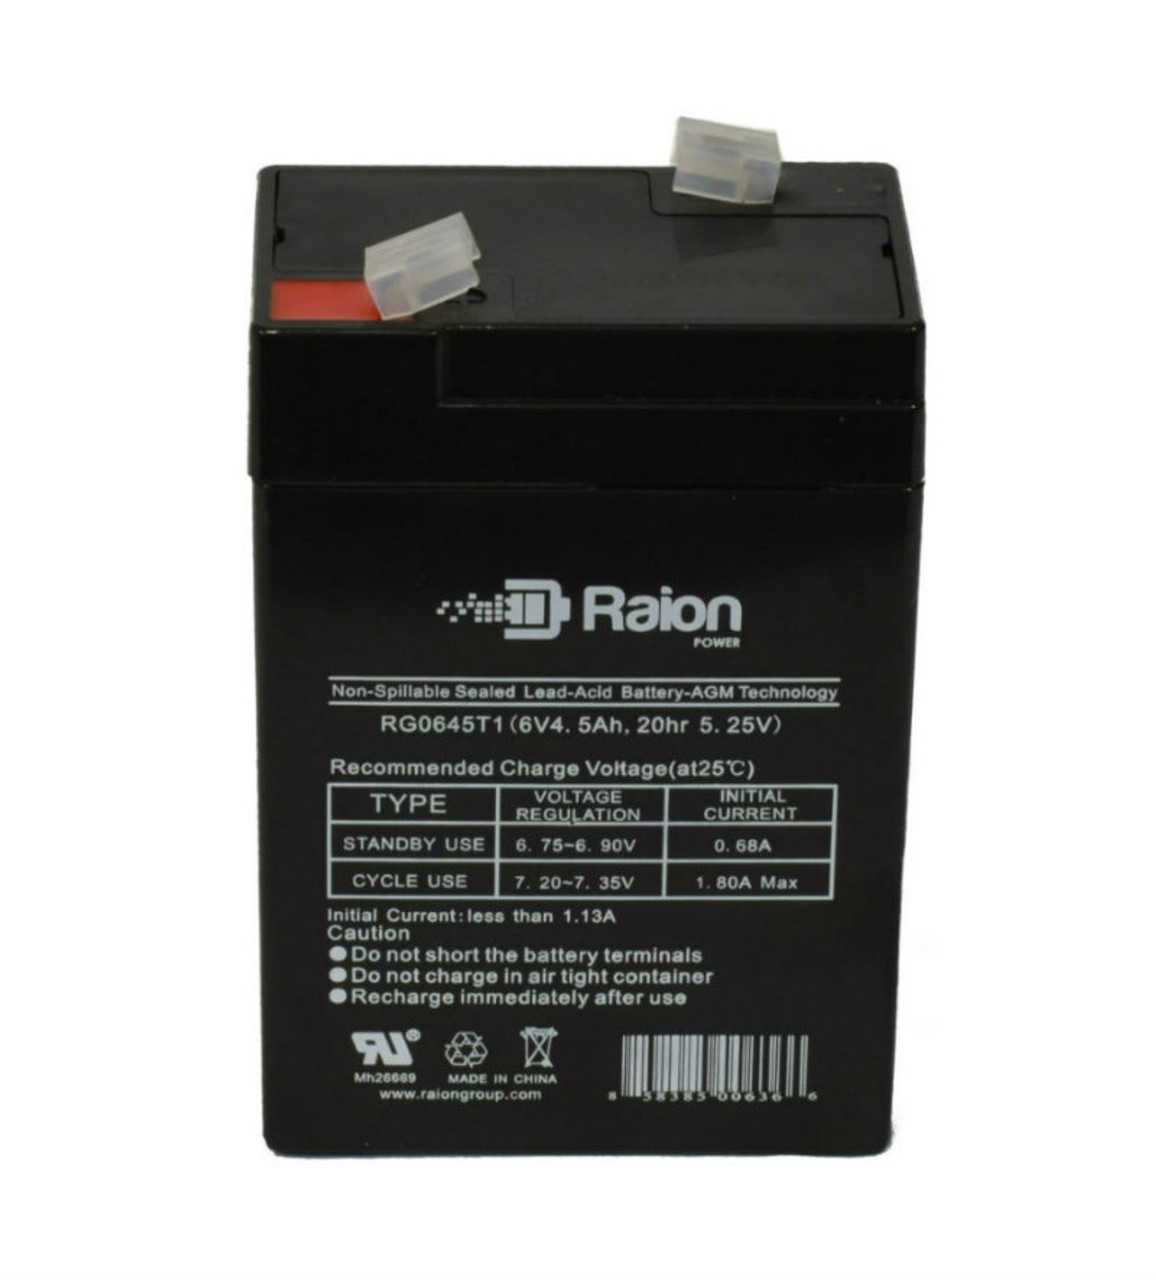 Raion Power RG0645T1 Replacement Battery Cartridge for CGB CB650